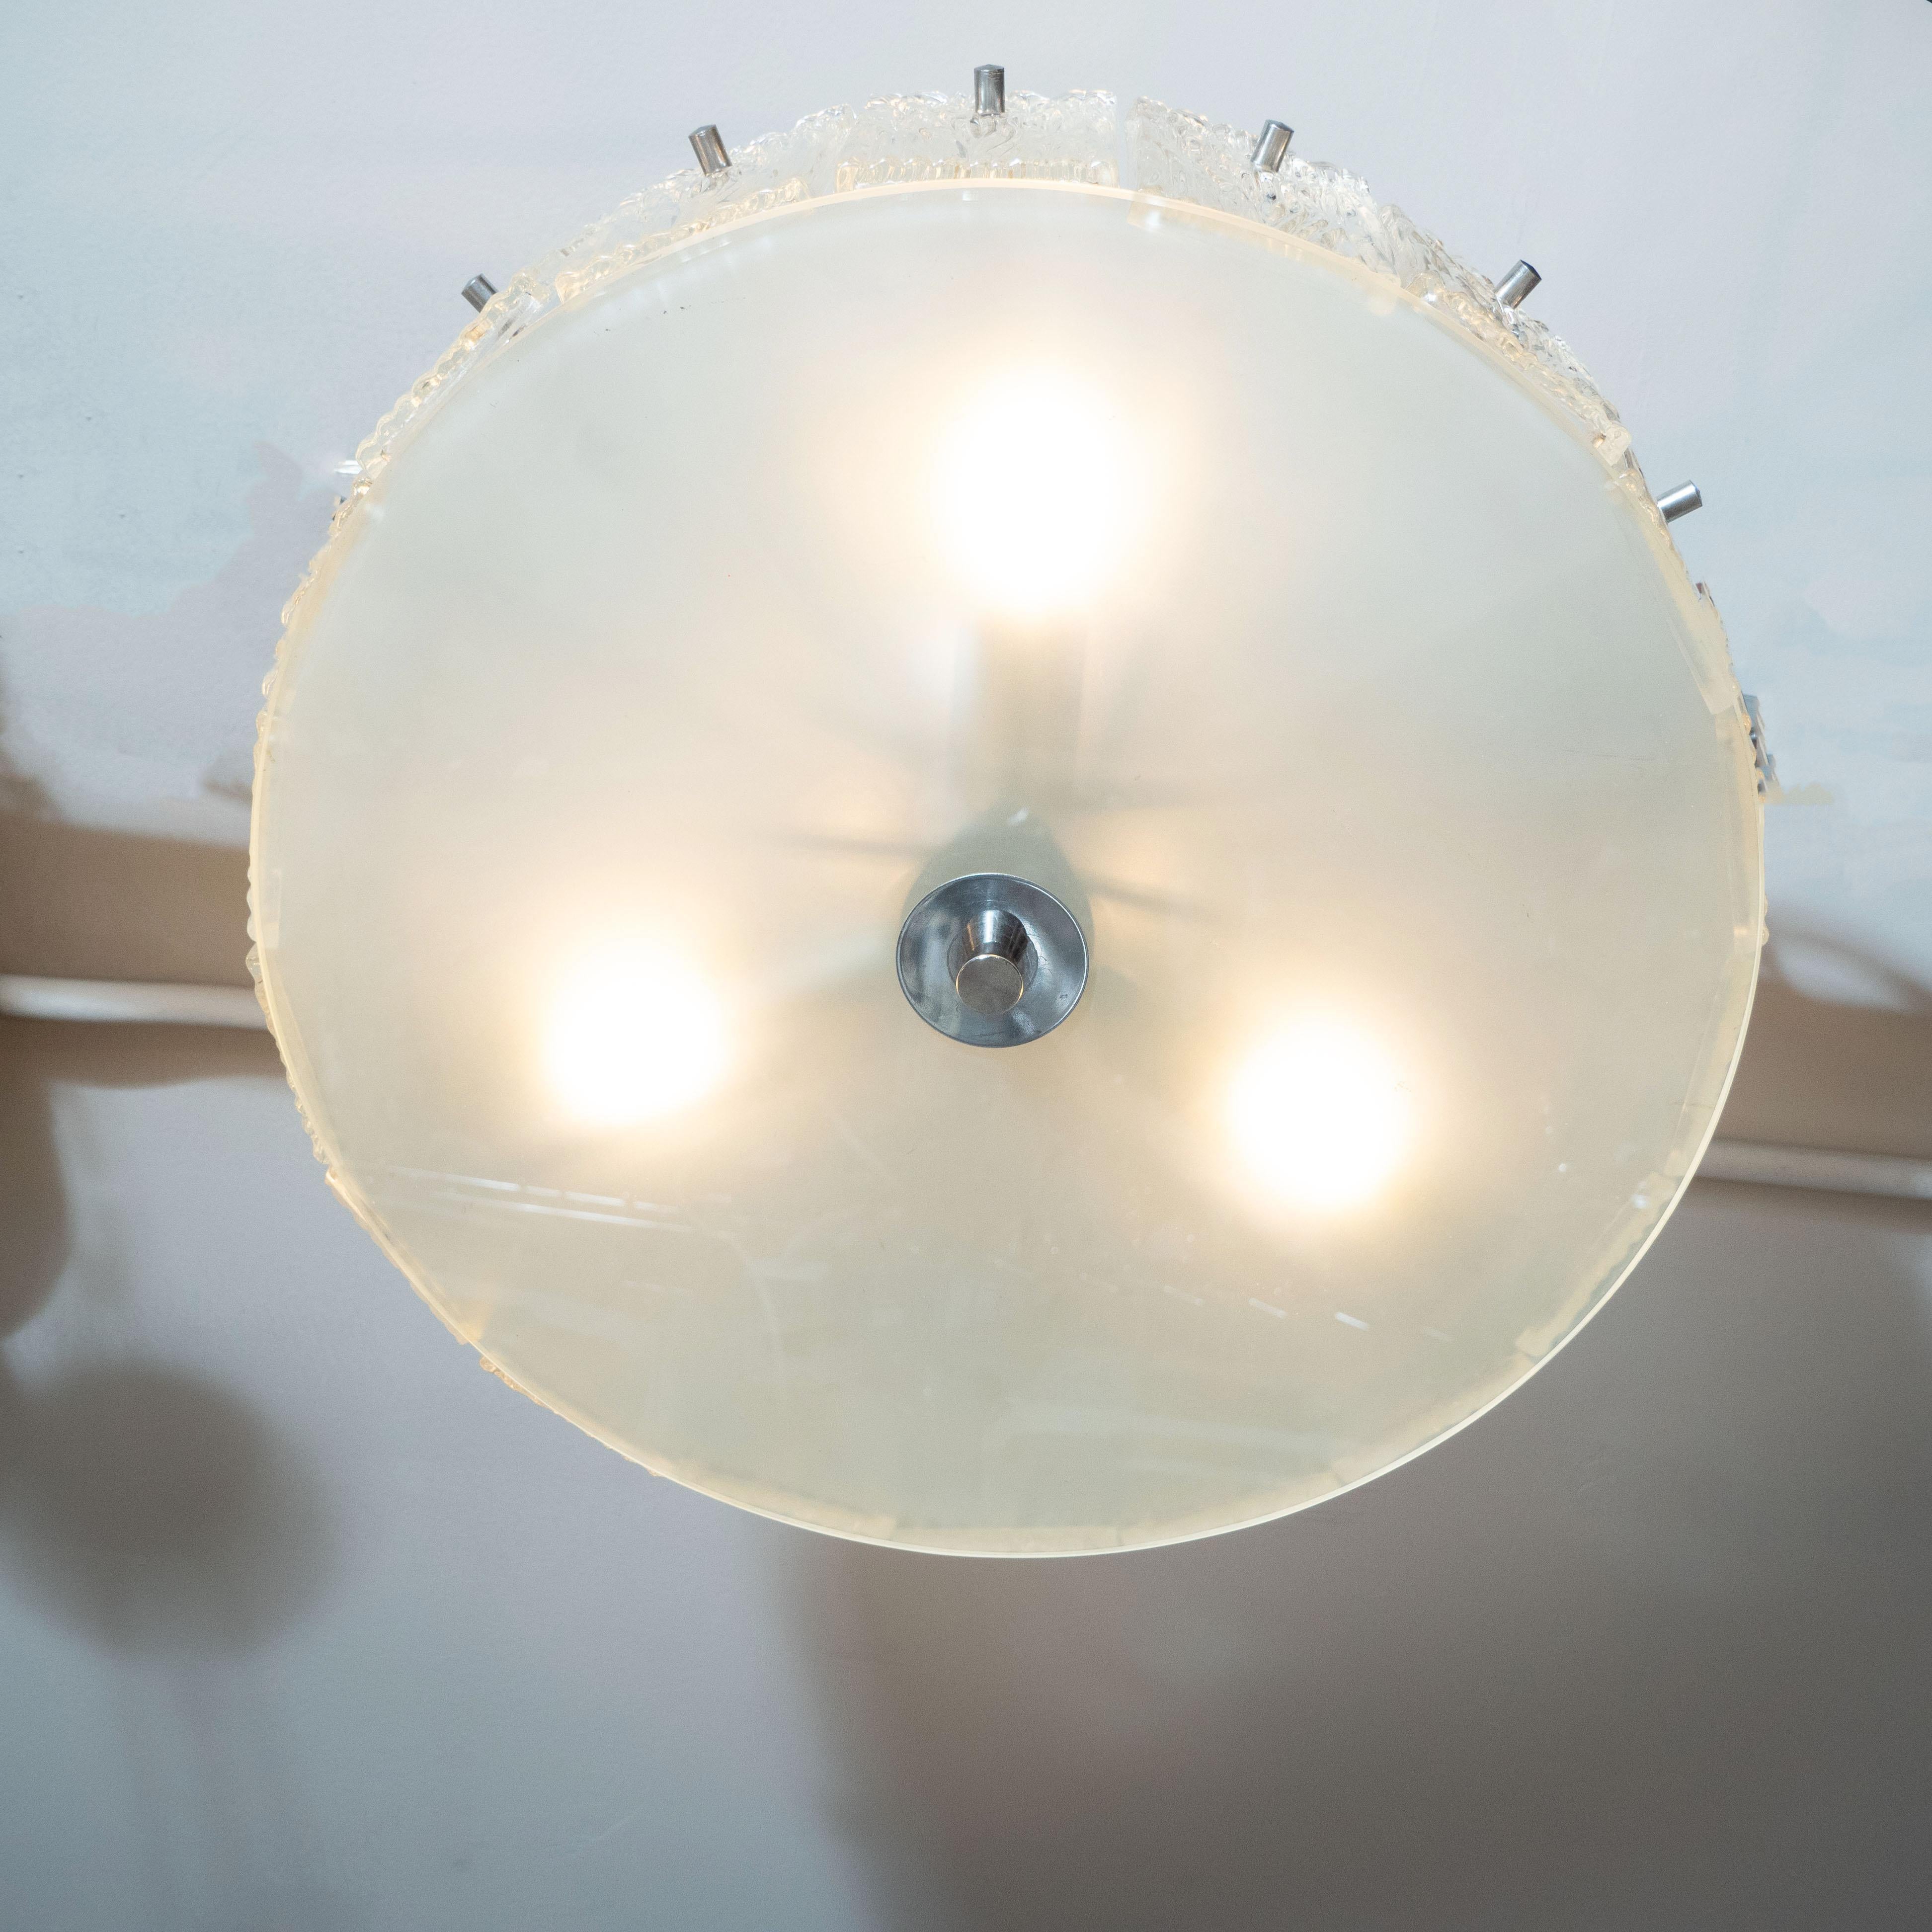 Mid-20th Century Mid-Century Modern Flush Mount Frosted Glass and Nickel Chandelier by Kinkeldey